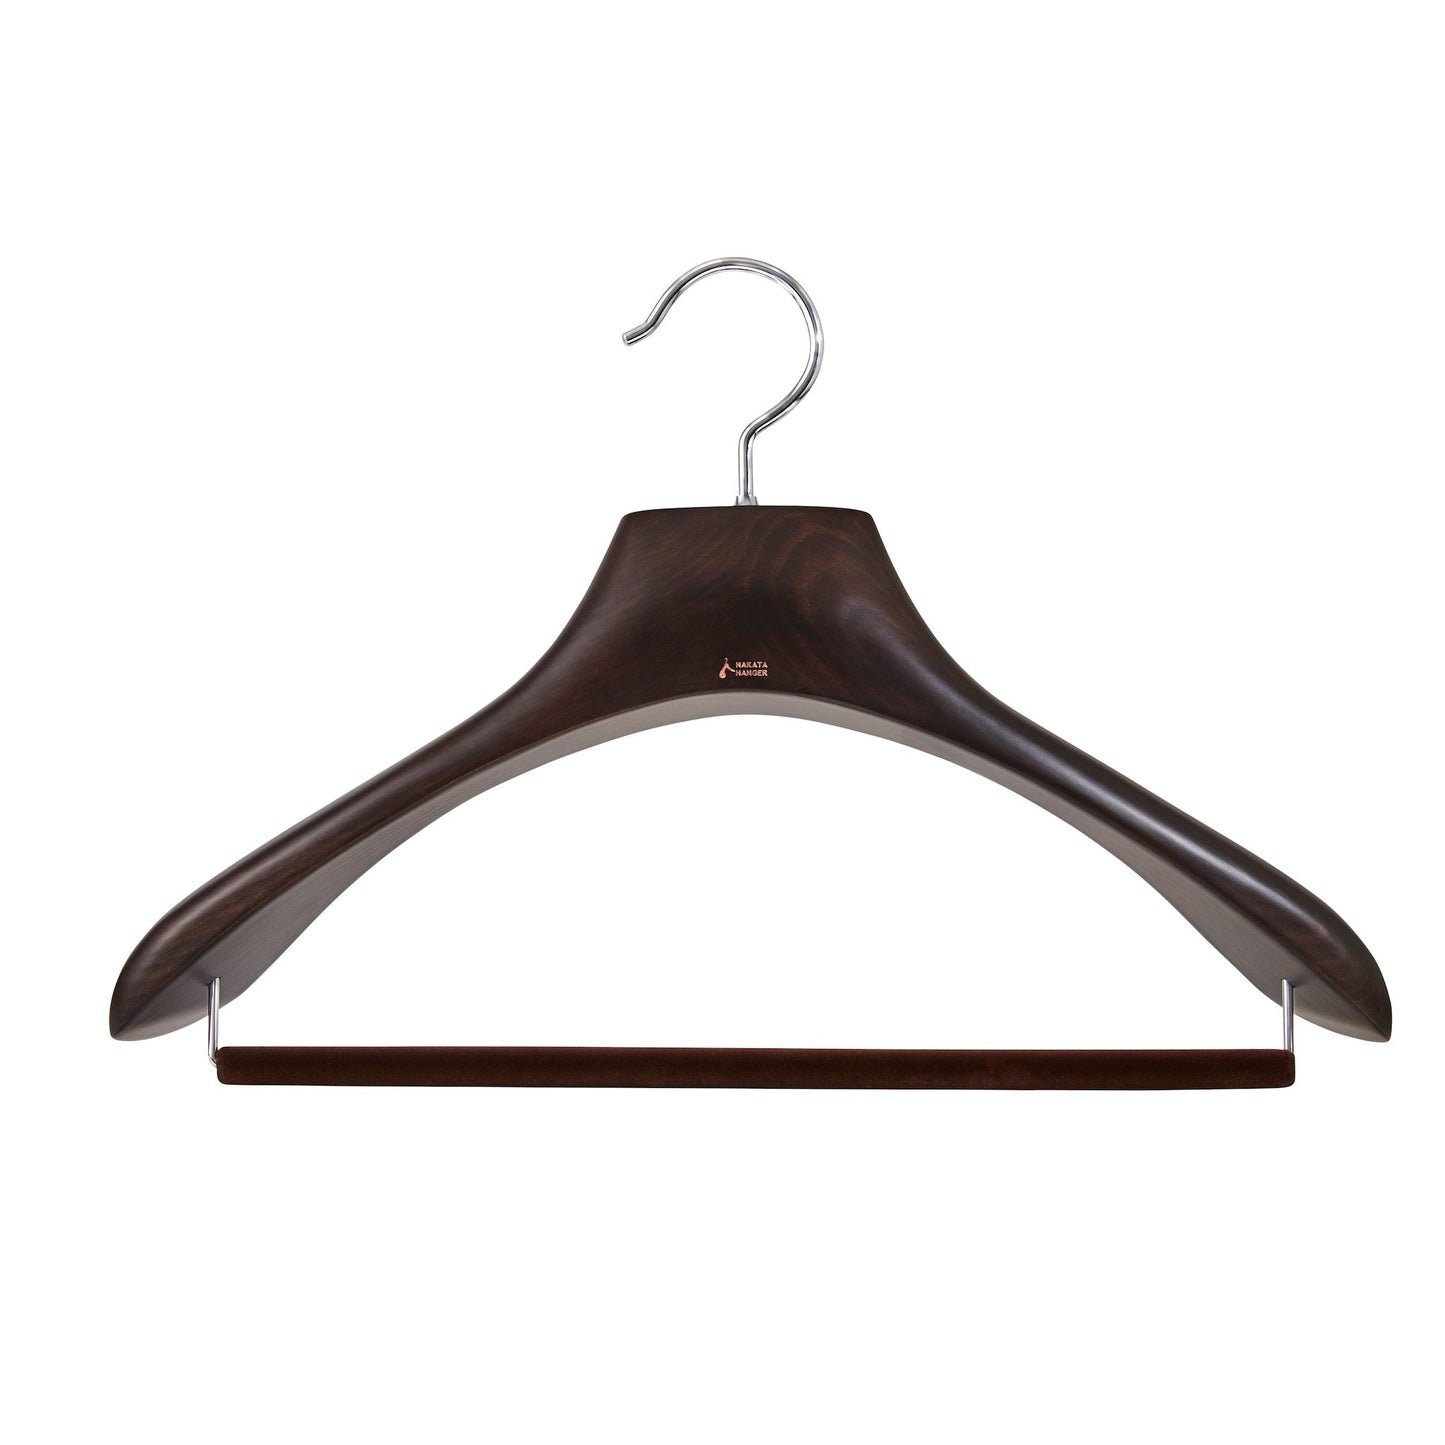 Premium Suit Hanger 'Silver Top' by Nakata